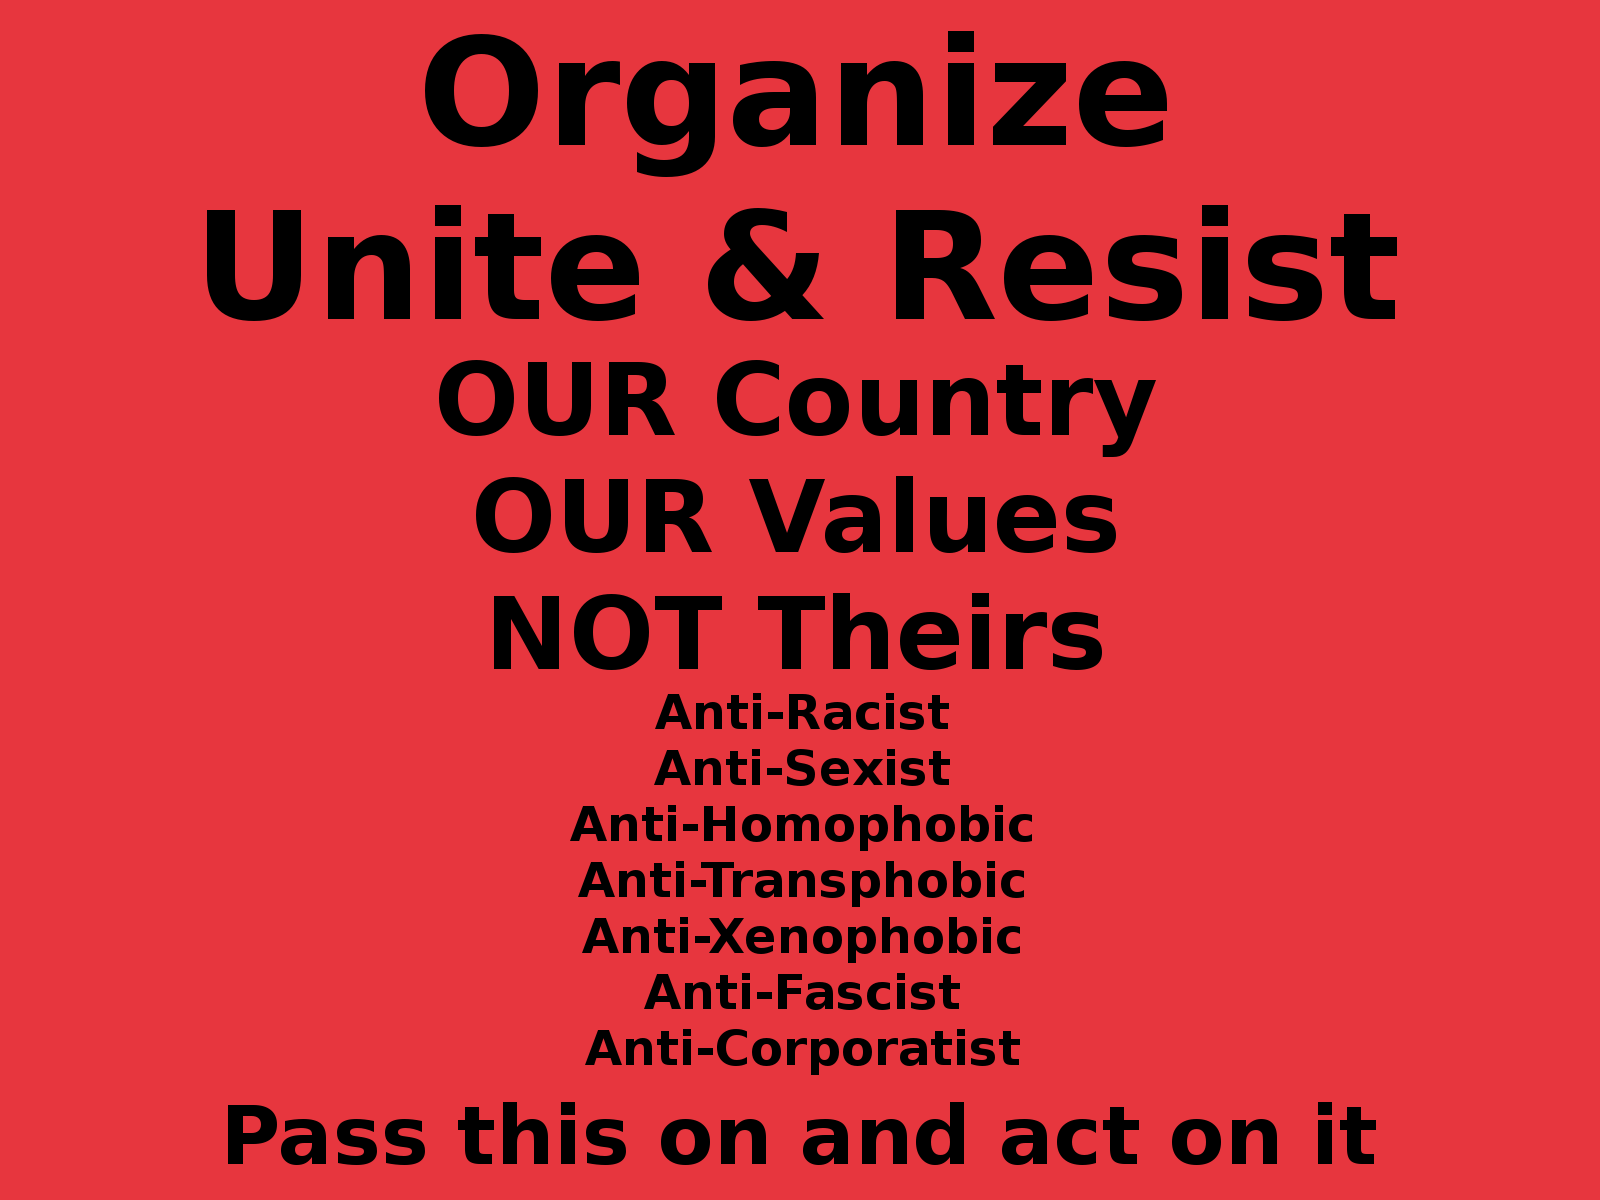 Organize Unite Resist  OUR Country OUR Values NOT Theirs Anti-Racist Anti-Sexist Anti-Homophobic Anti-Transphobic Anti-Xenophobic Anti-Fascist Anti-Corporatist  Pass this on and act on it